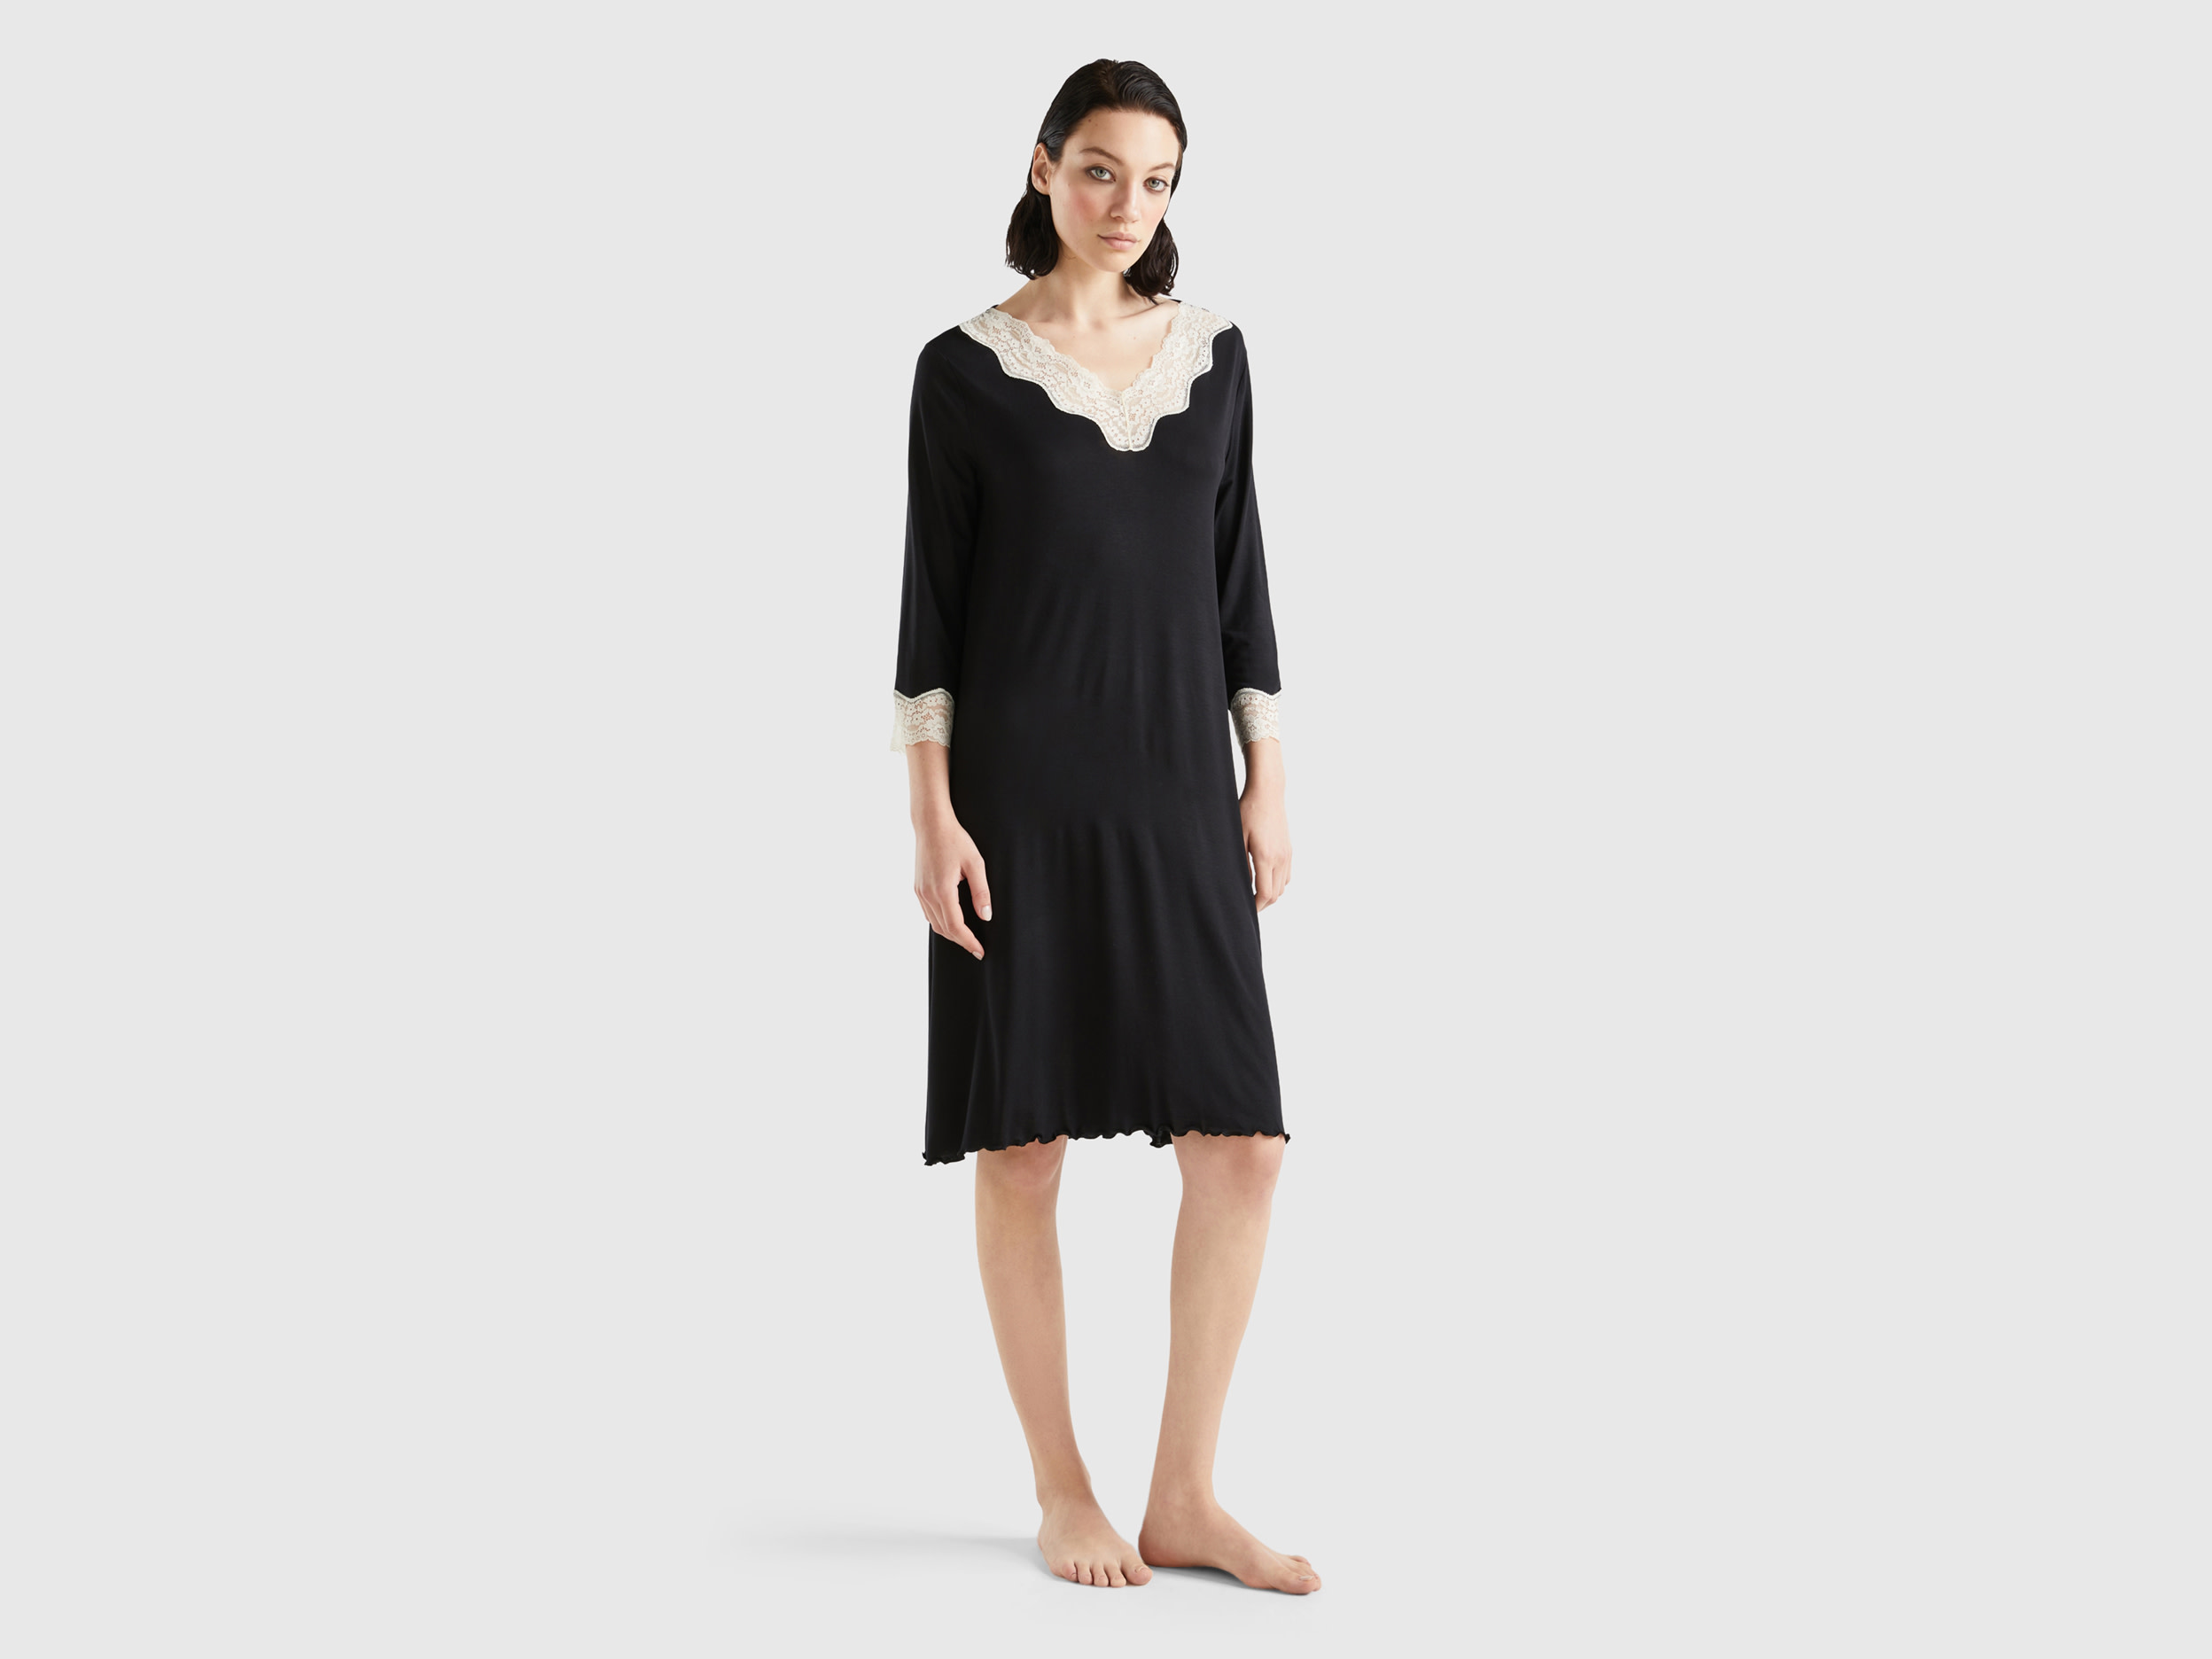 Benetton, Nightshirt With Lace Details, size XS, Black, Women